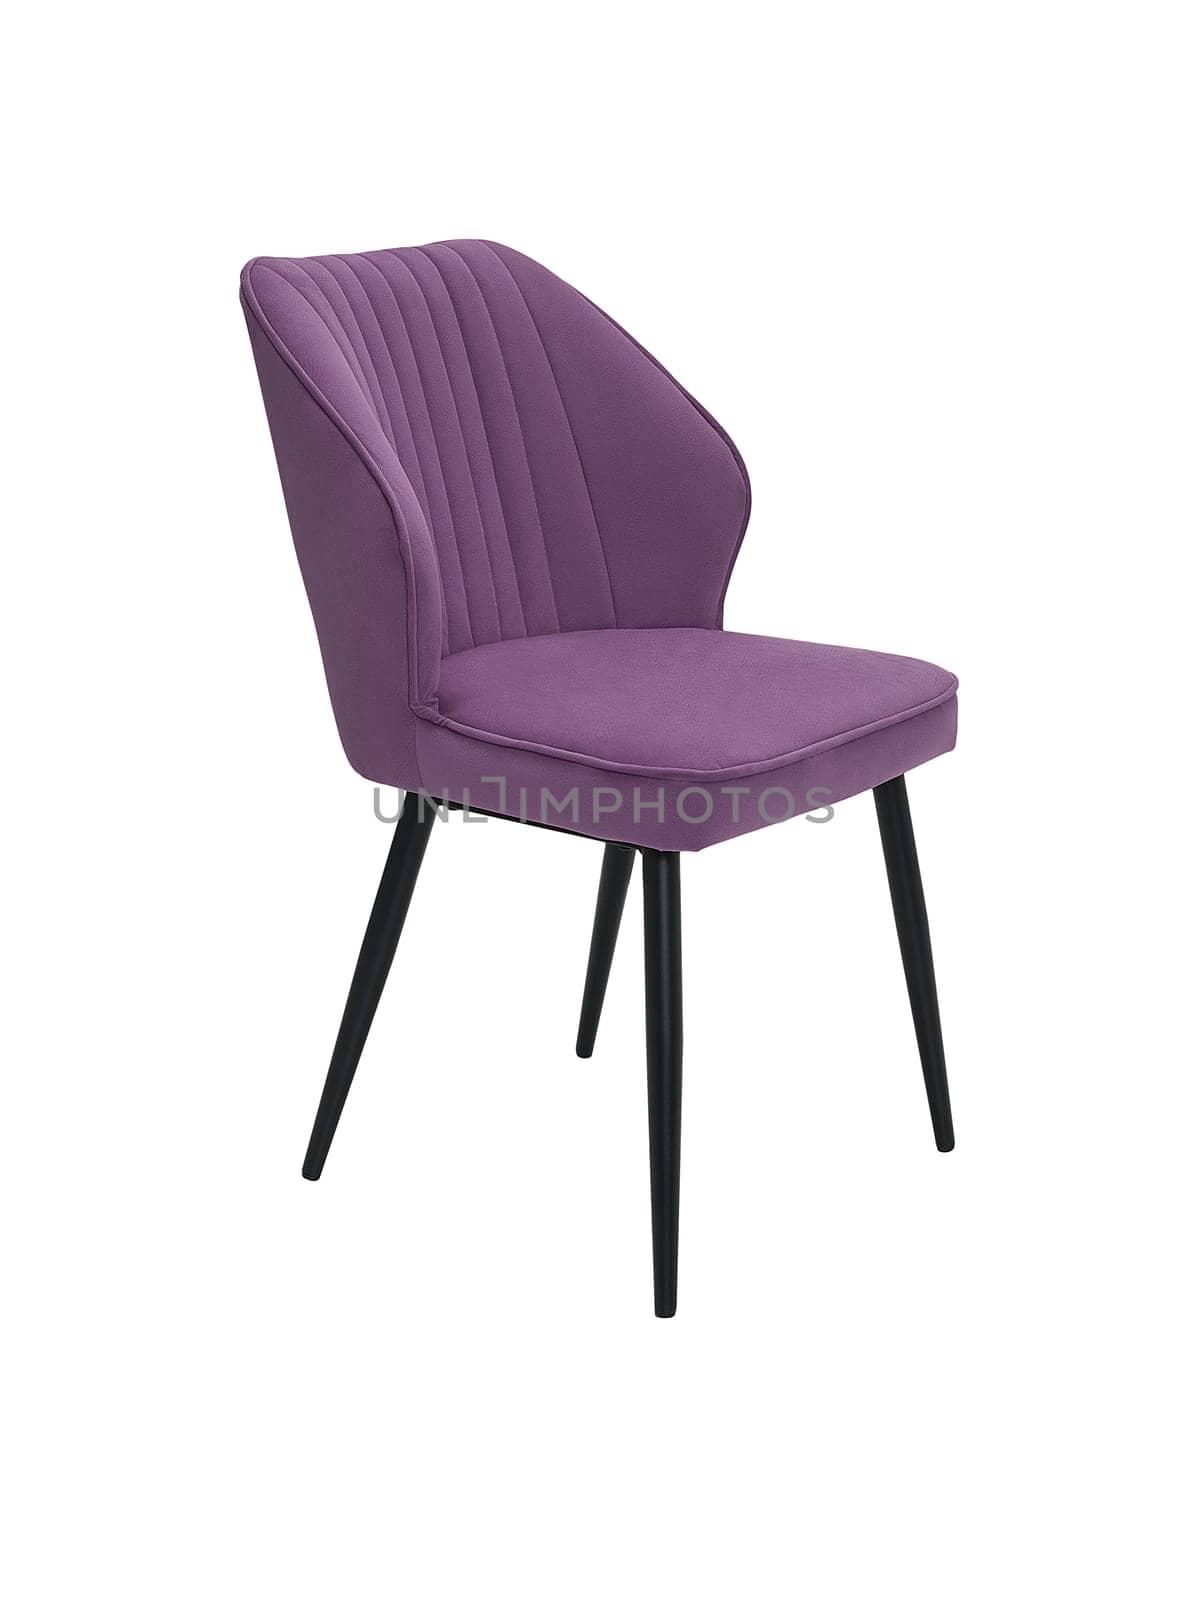 modern purple fabric chair with wooden legs isolated on white background, side view. contemporary furniture in classical style, interior, home design